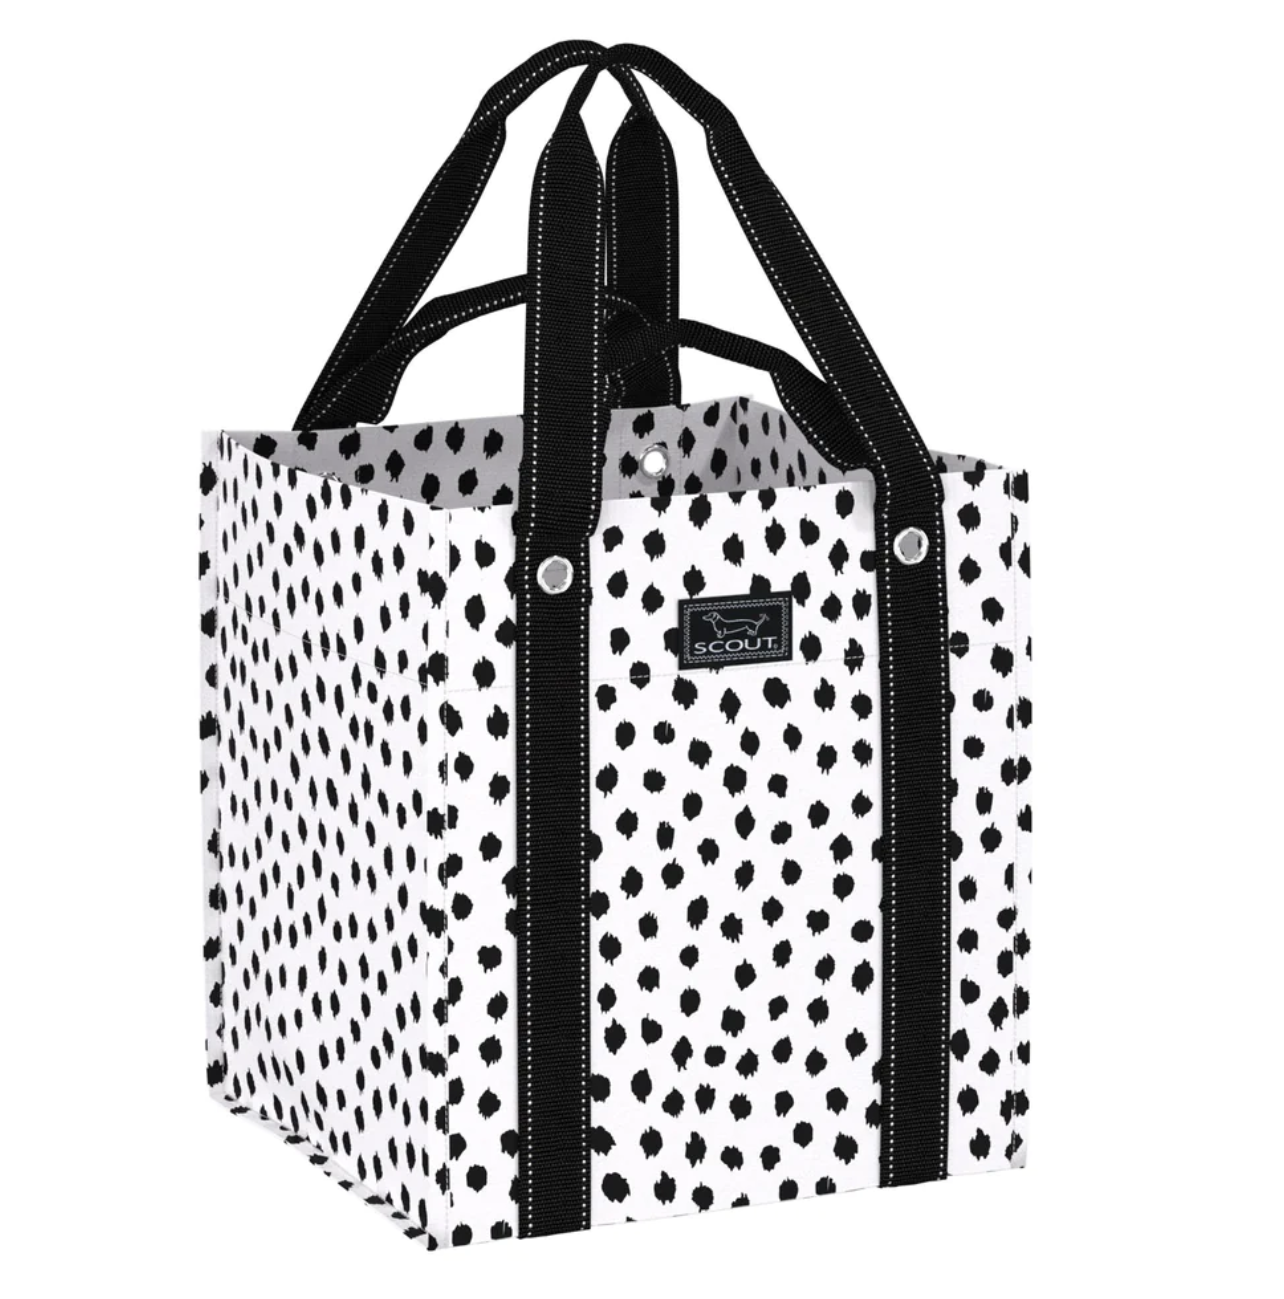 Scout Bagette Bag Totes in Seeing Spots at Wrapsody